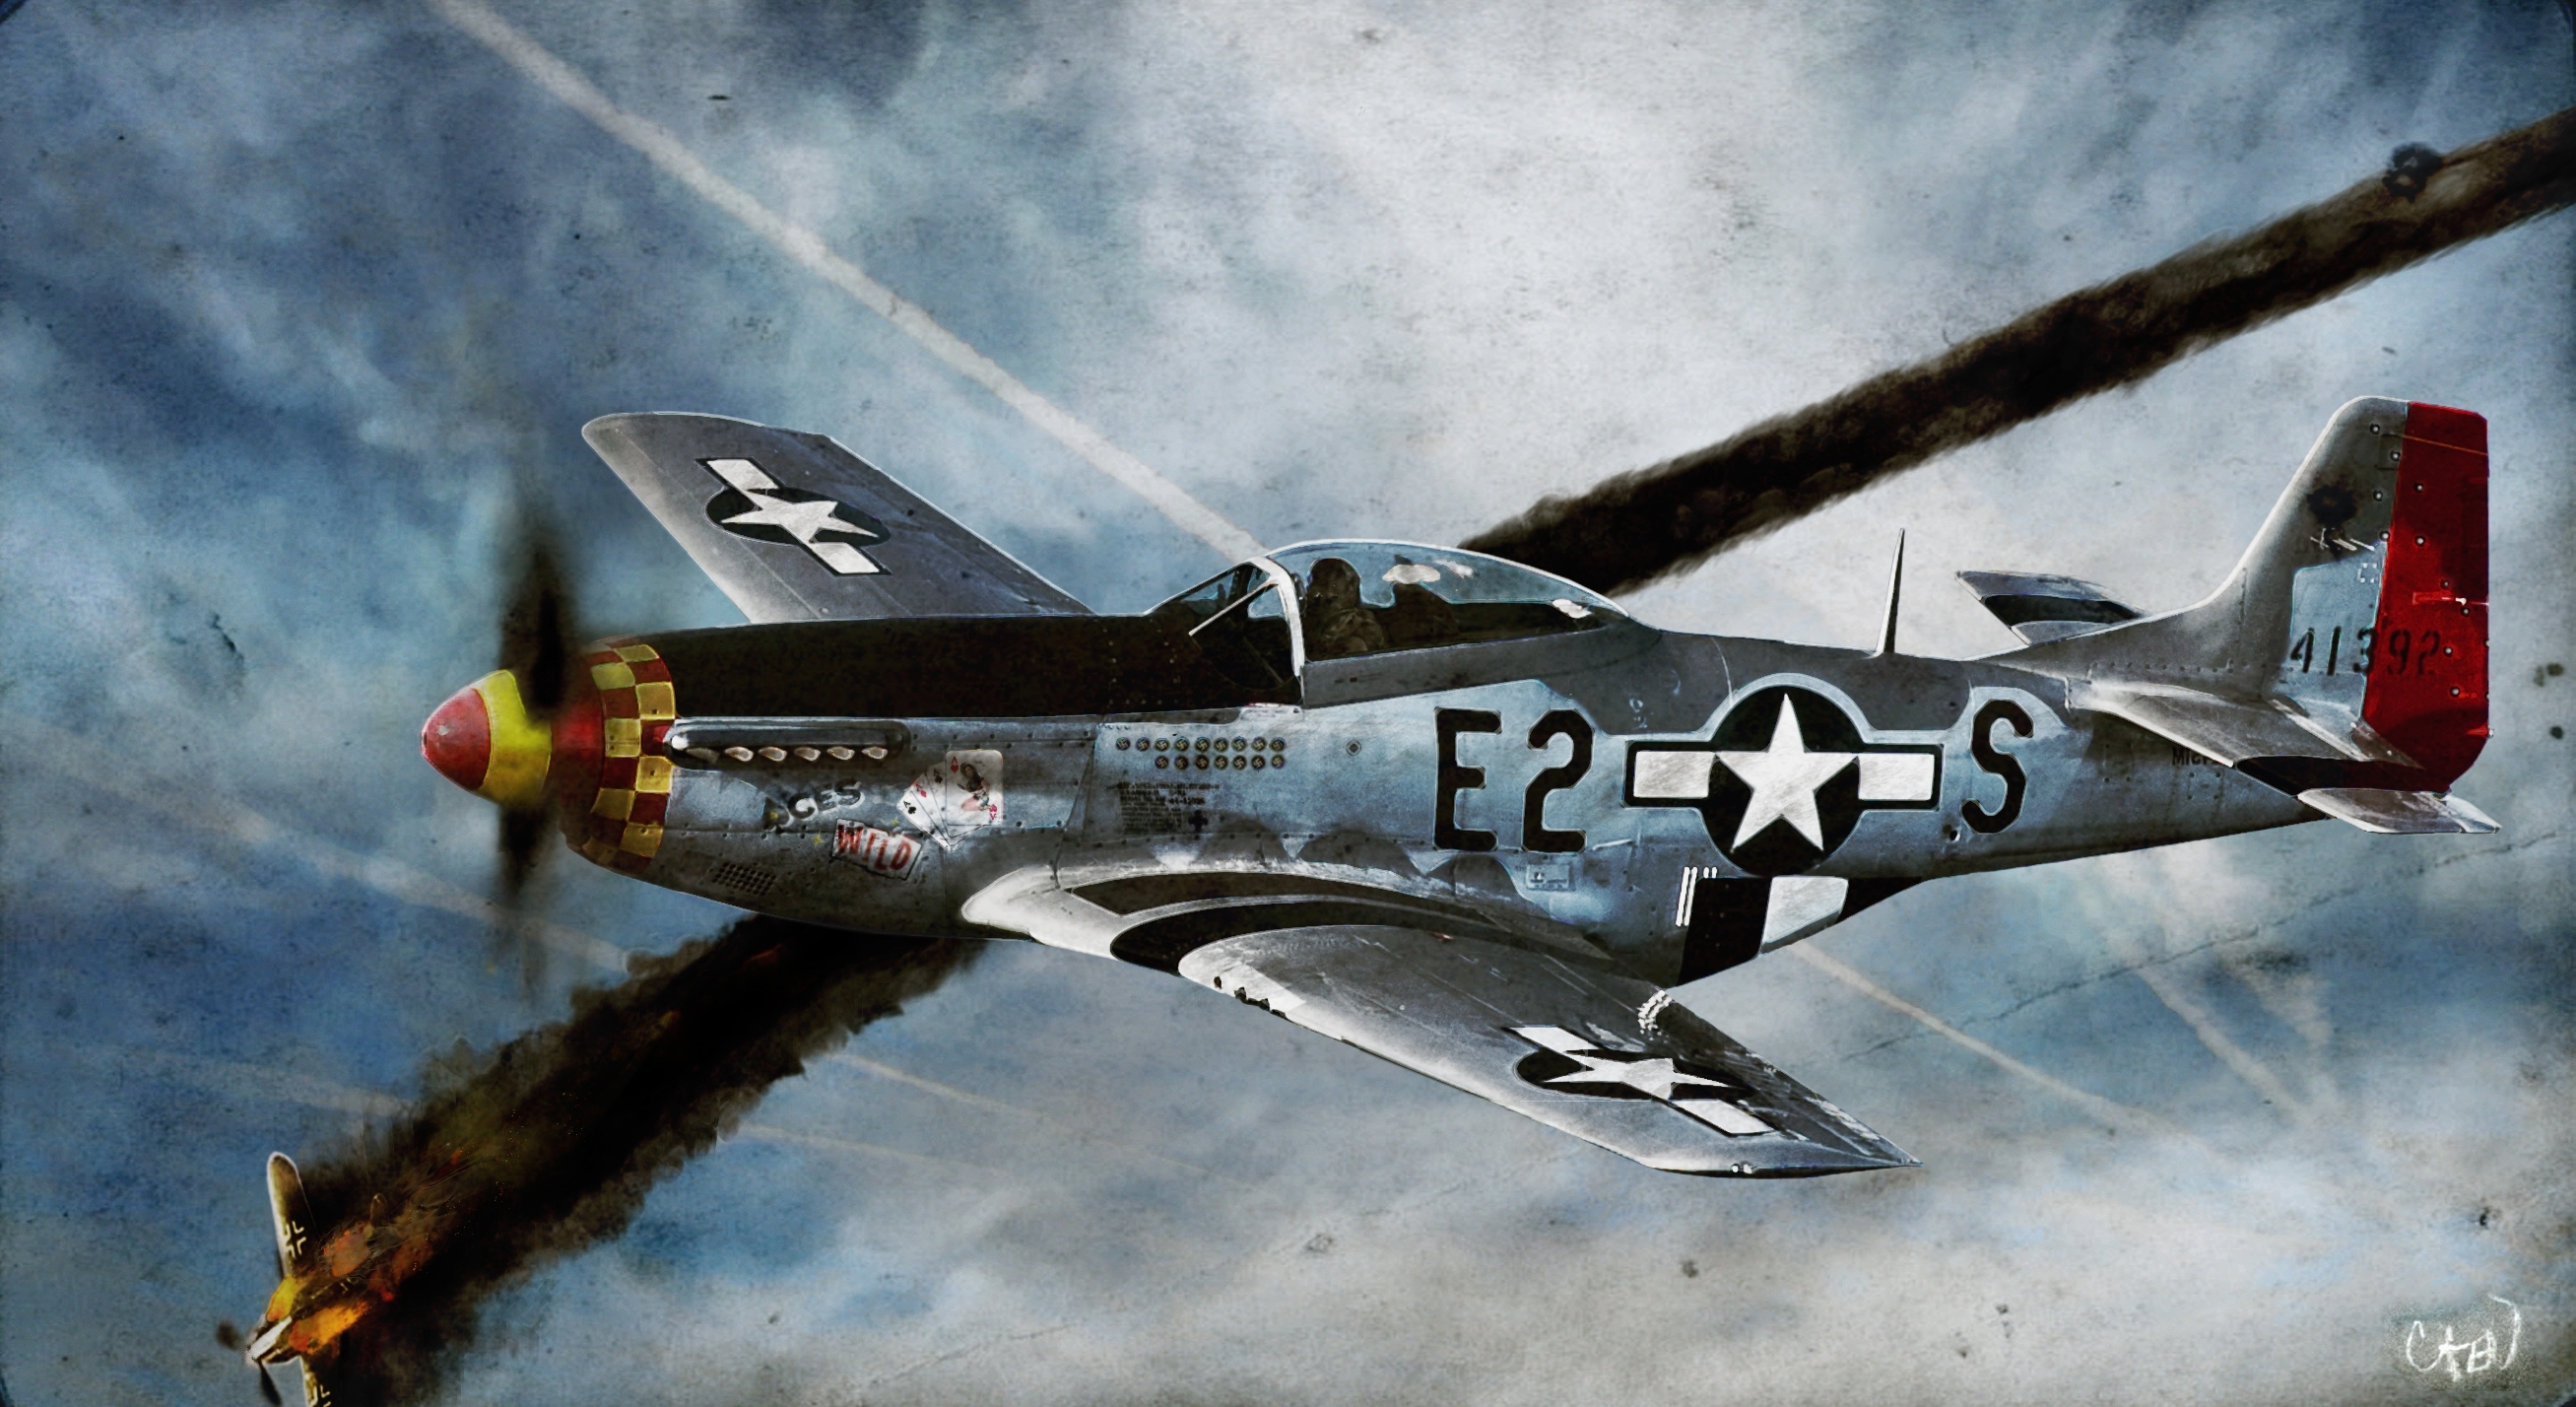 10 Top P 51 Mustang Background FULL HD 1920 × 1080 For PC Ba